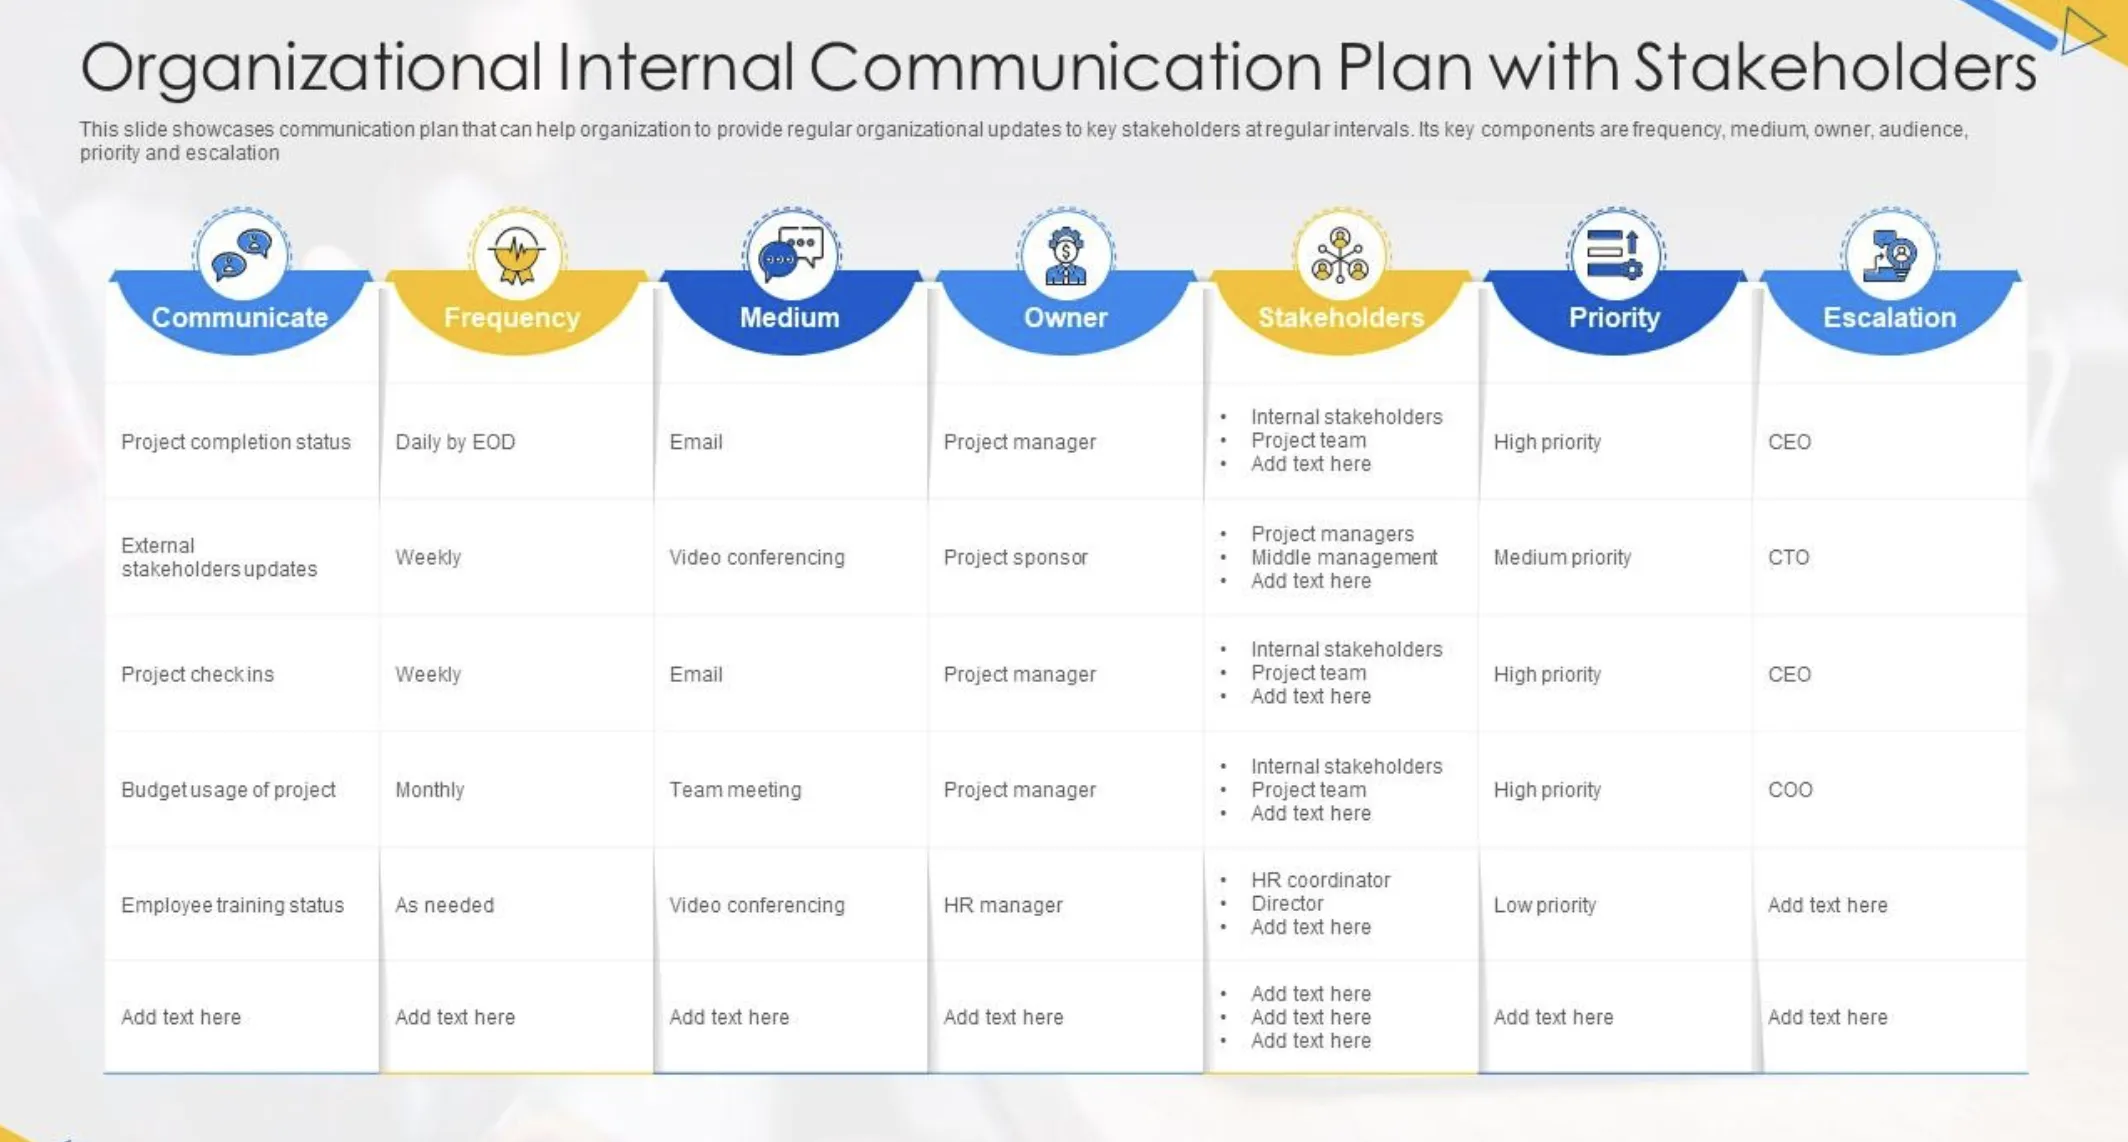 plangraphic - How to Write an Effective Communication Plan [+ Template]